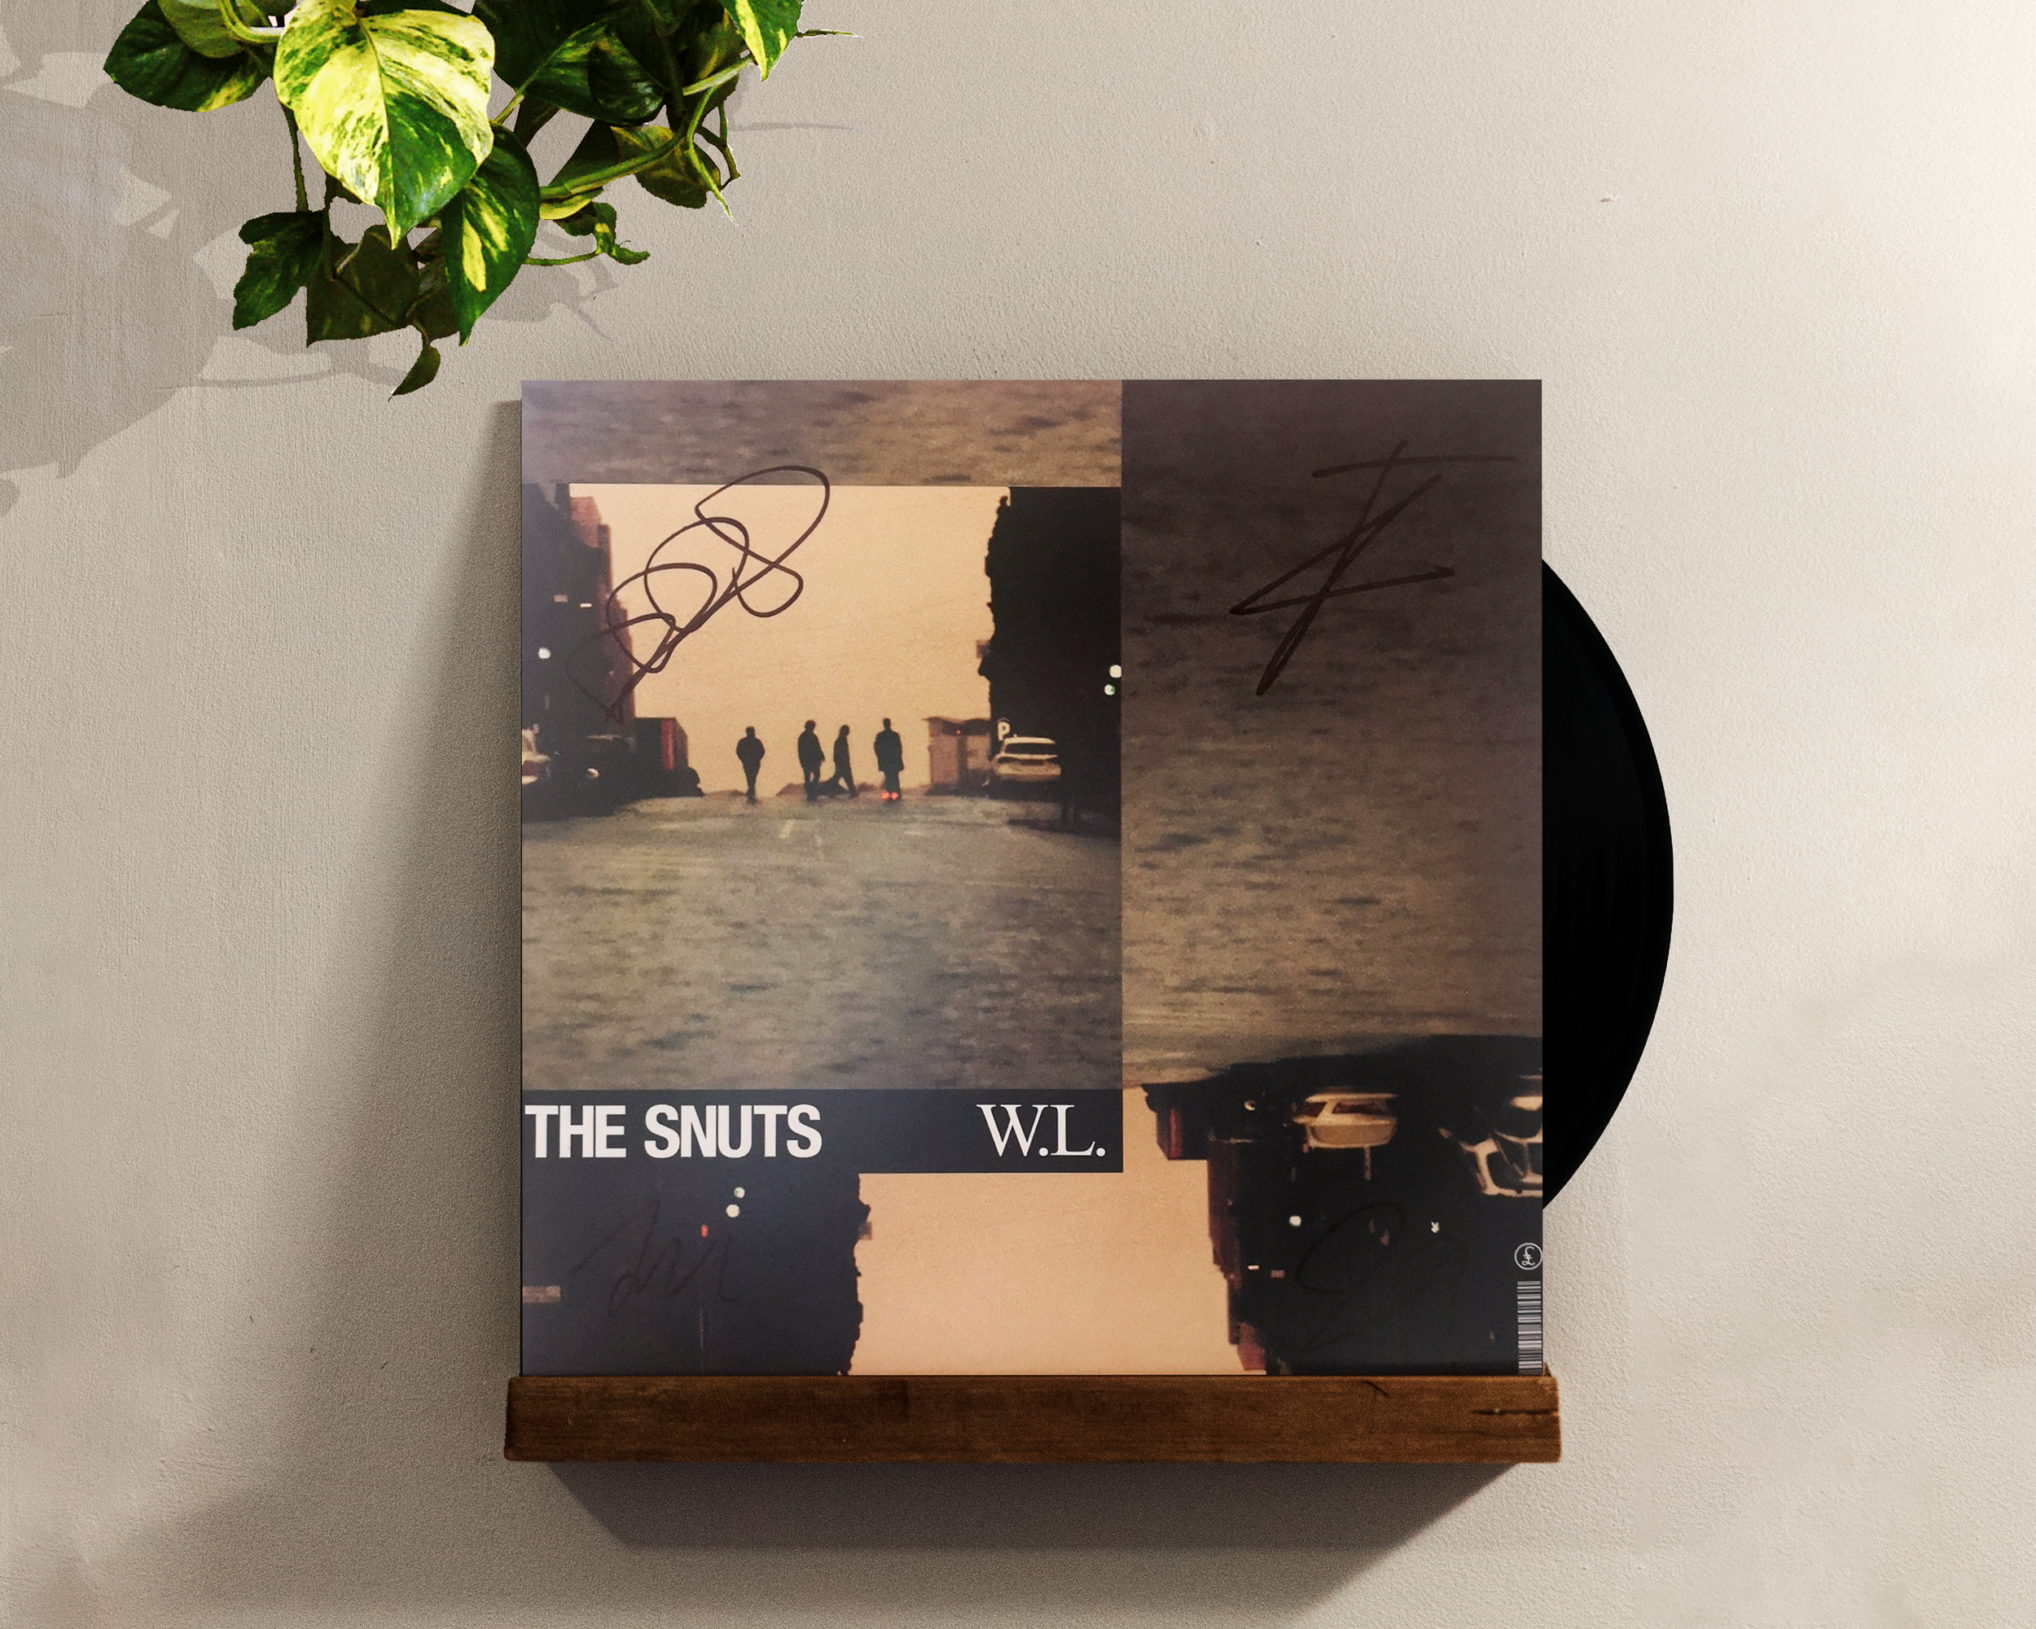 The Snuts - W.L - R.Y.C - My Record Collection - Vinyl